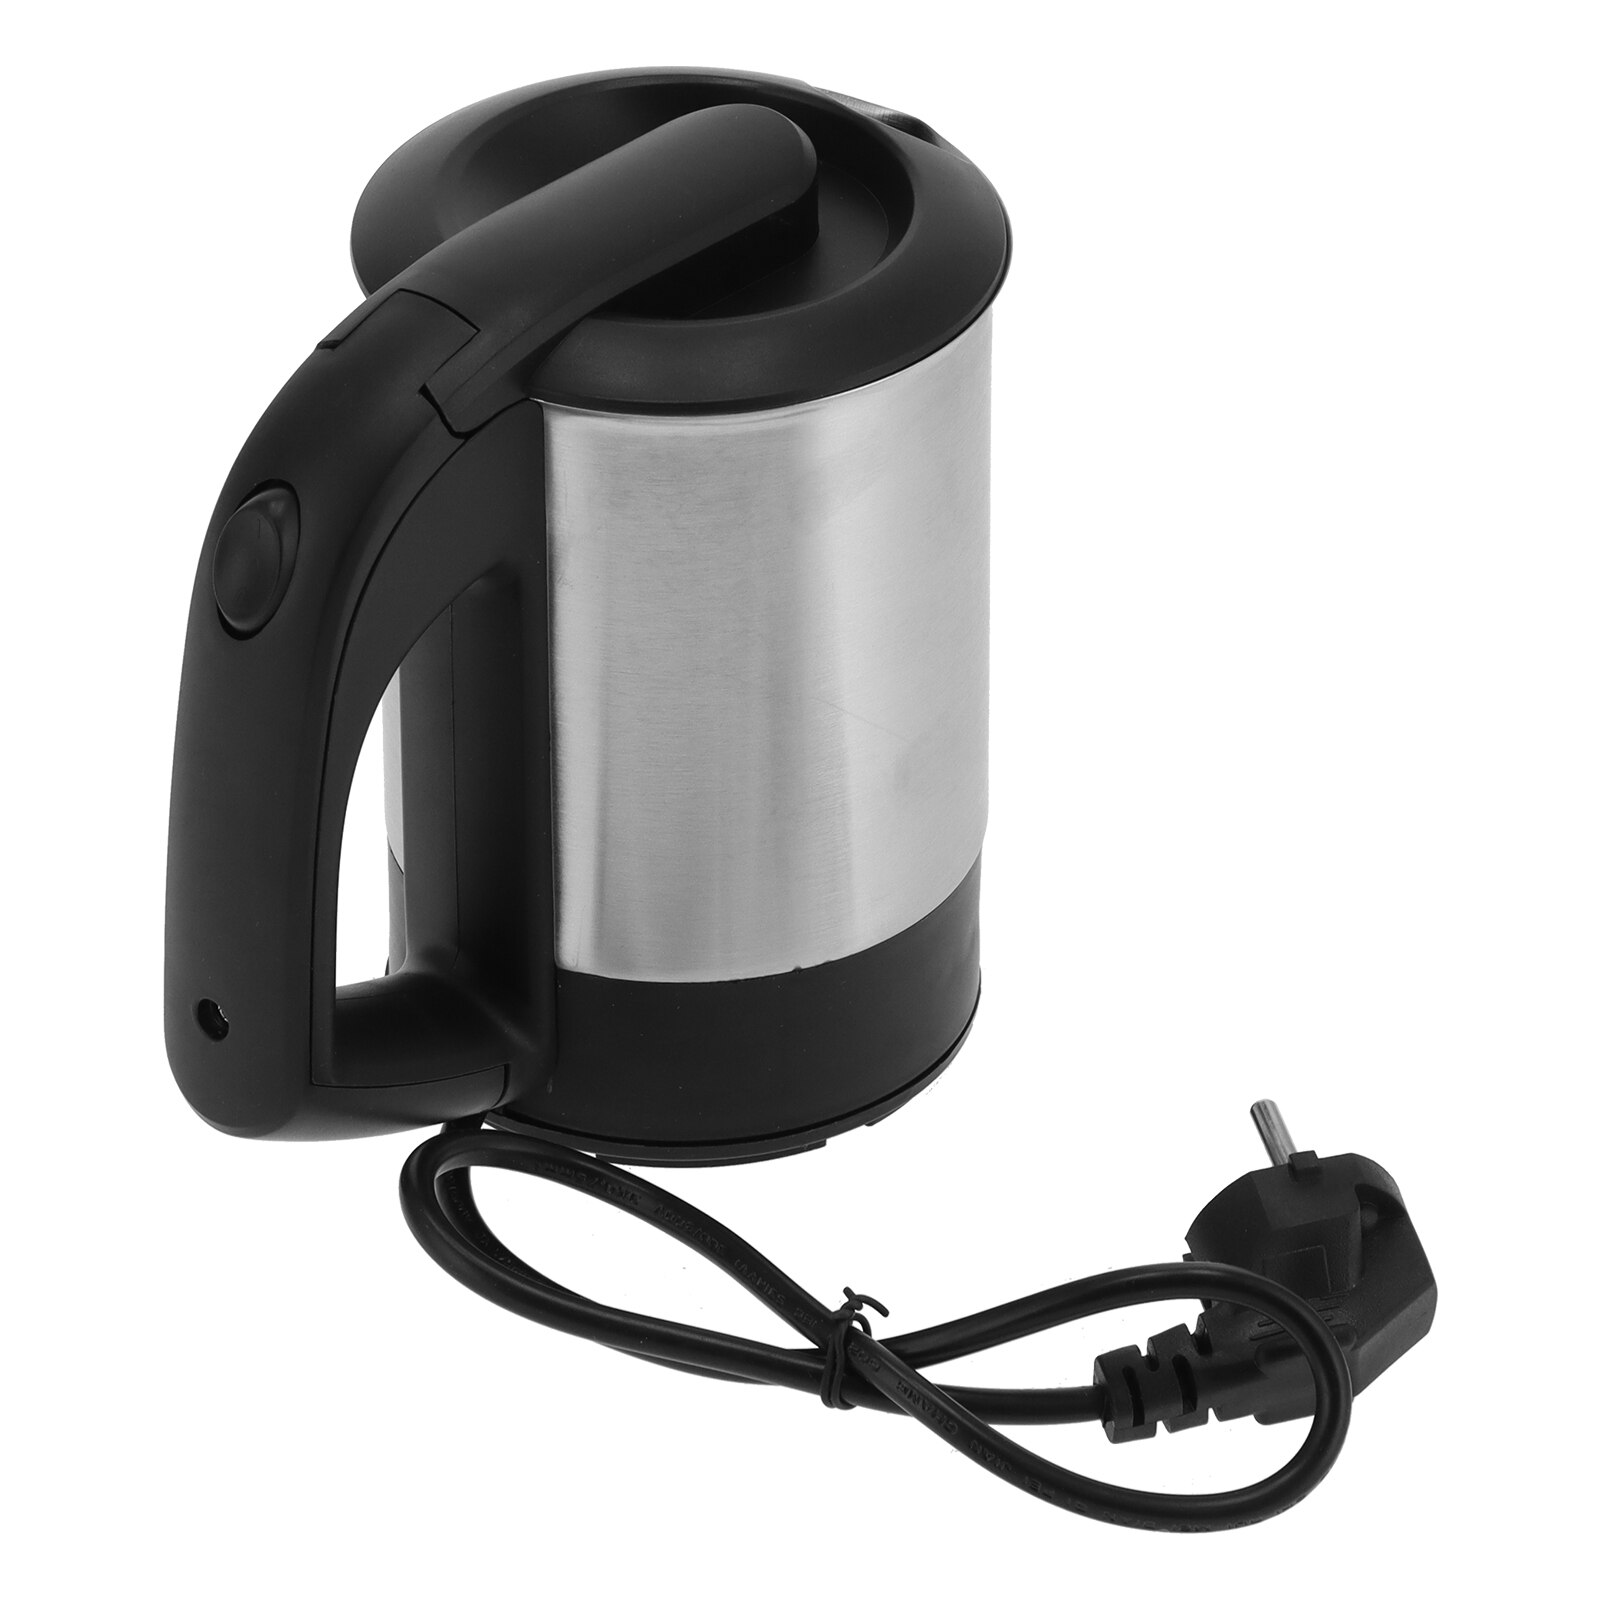 0.5L Portable Mini Electric Kettle Stainless Steel Automatic Power Off Travel Water Boiler Heating Kettle Pot EU 220V 1000W